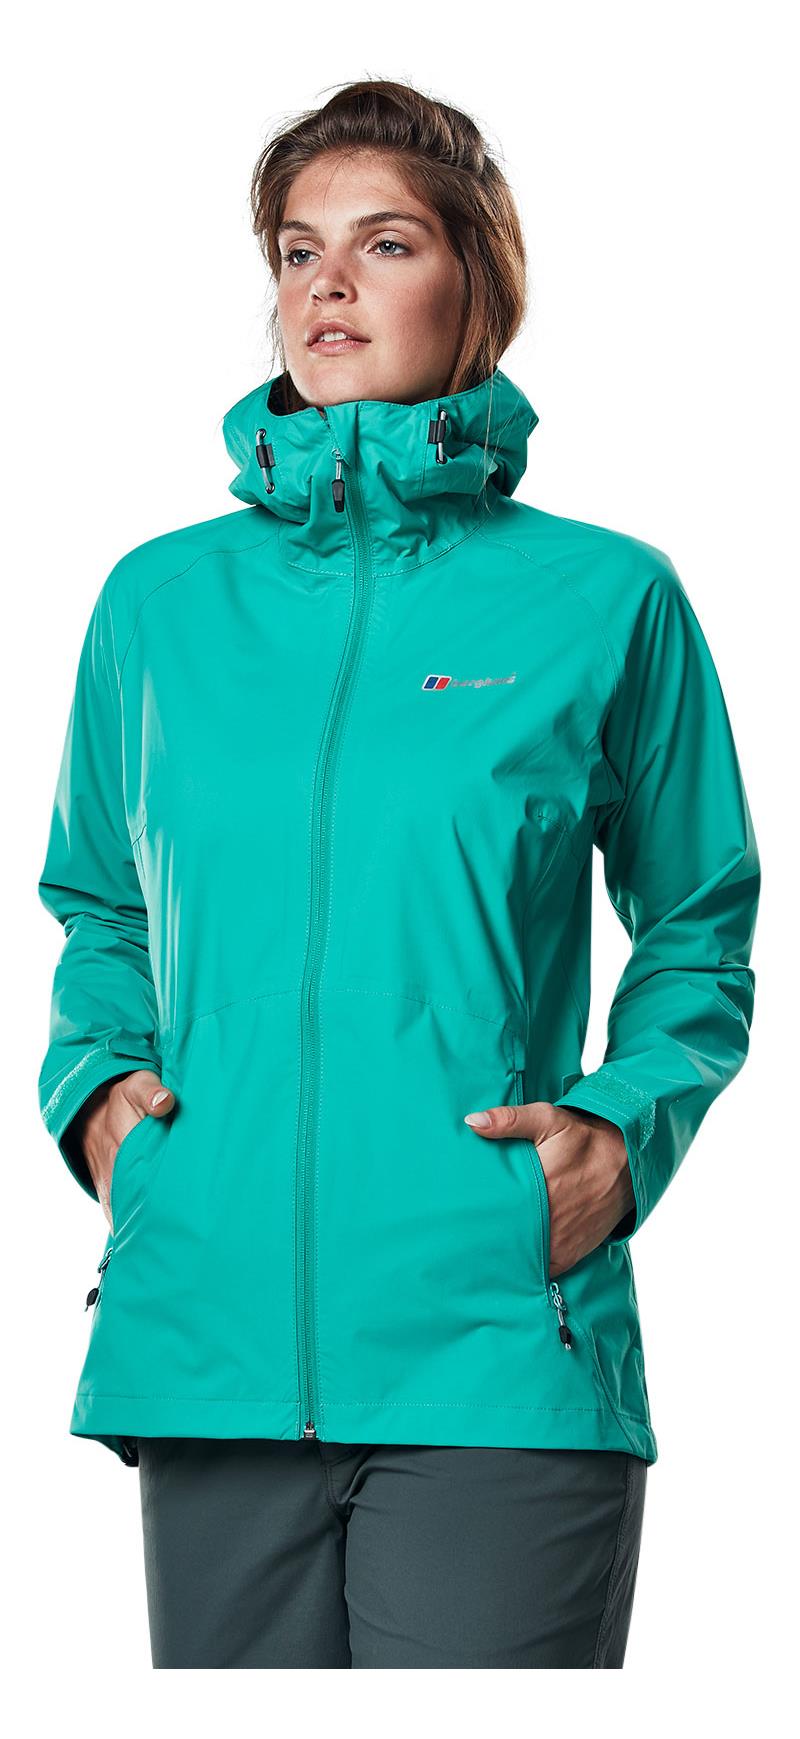 Berghaus Stormcloud Womens Waterproof Jacket for protection and style ...